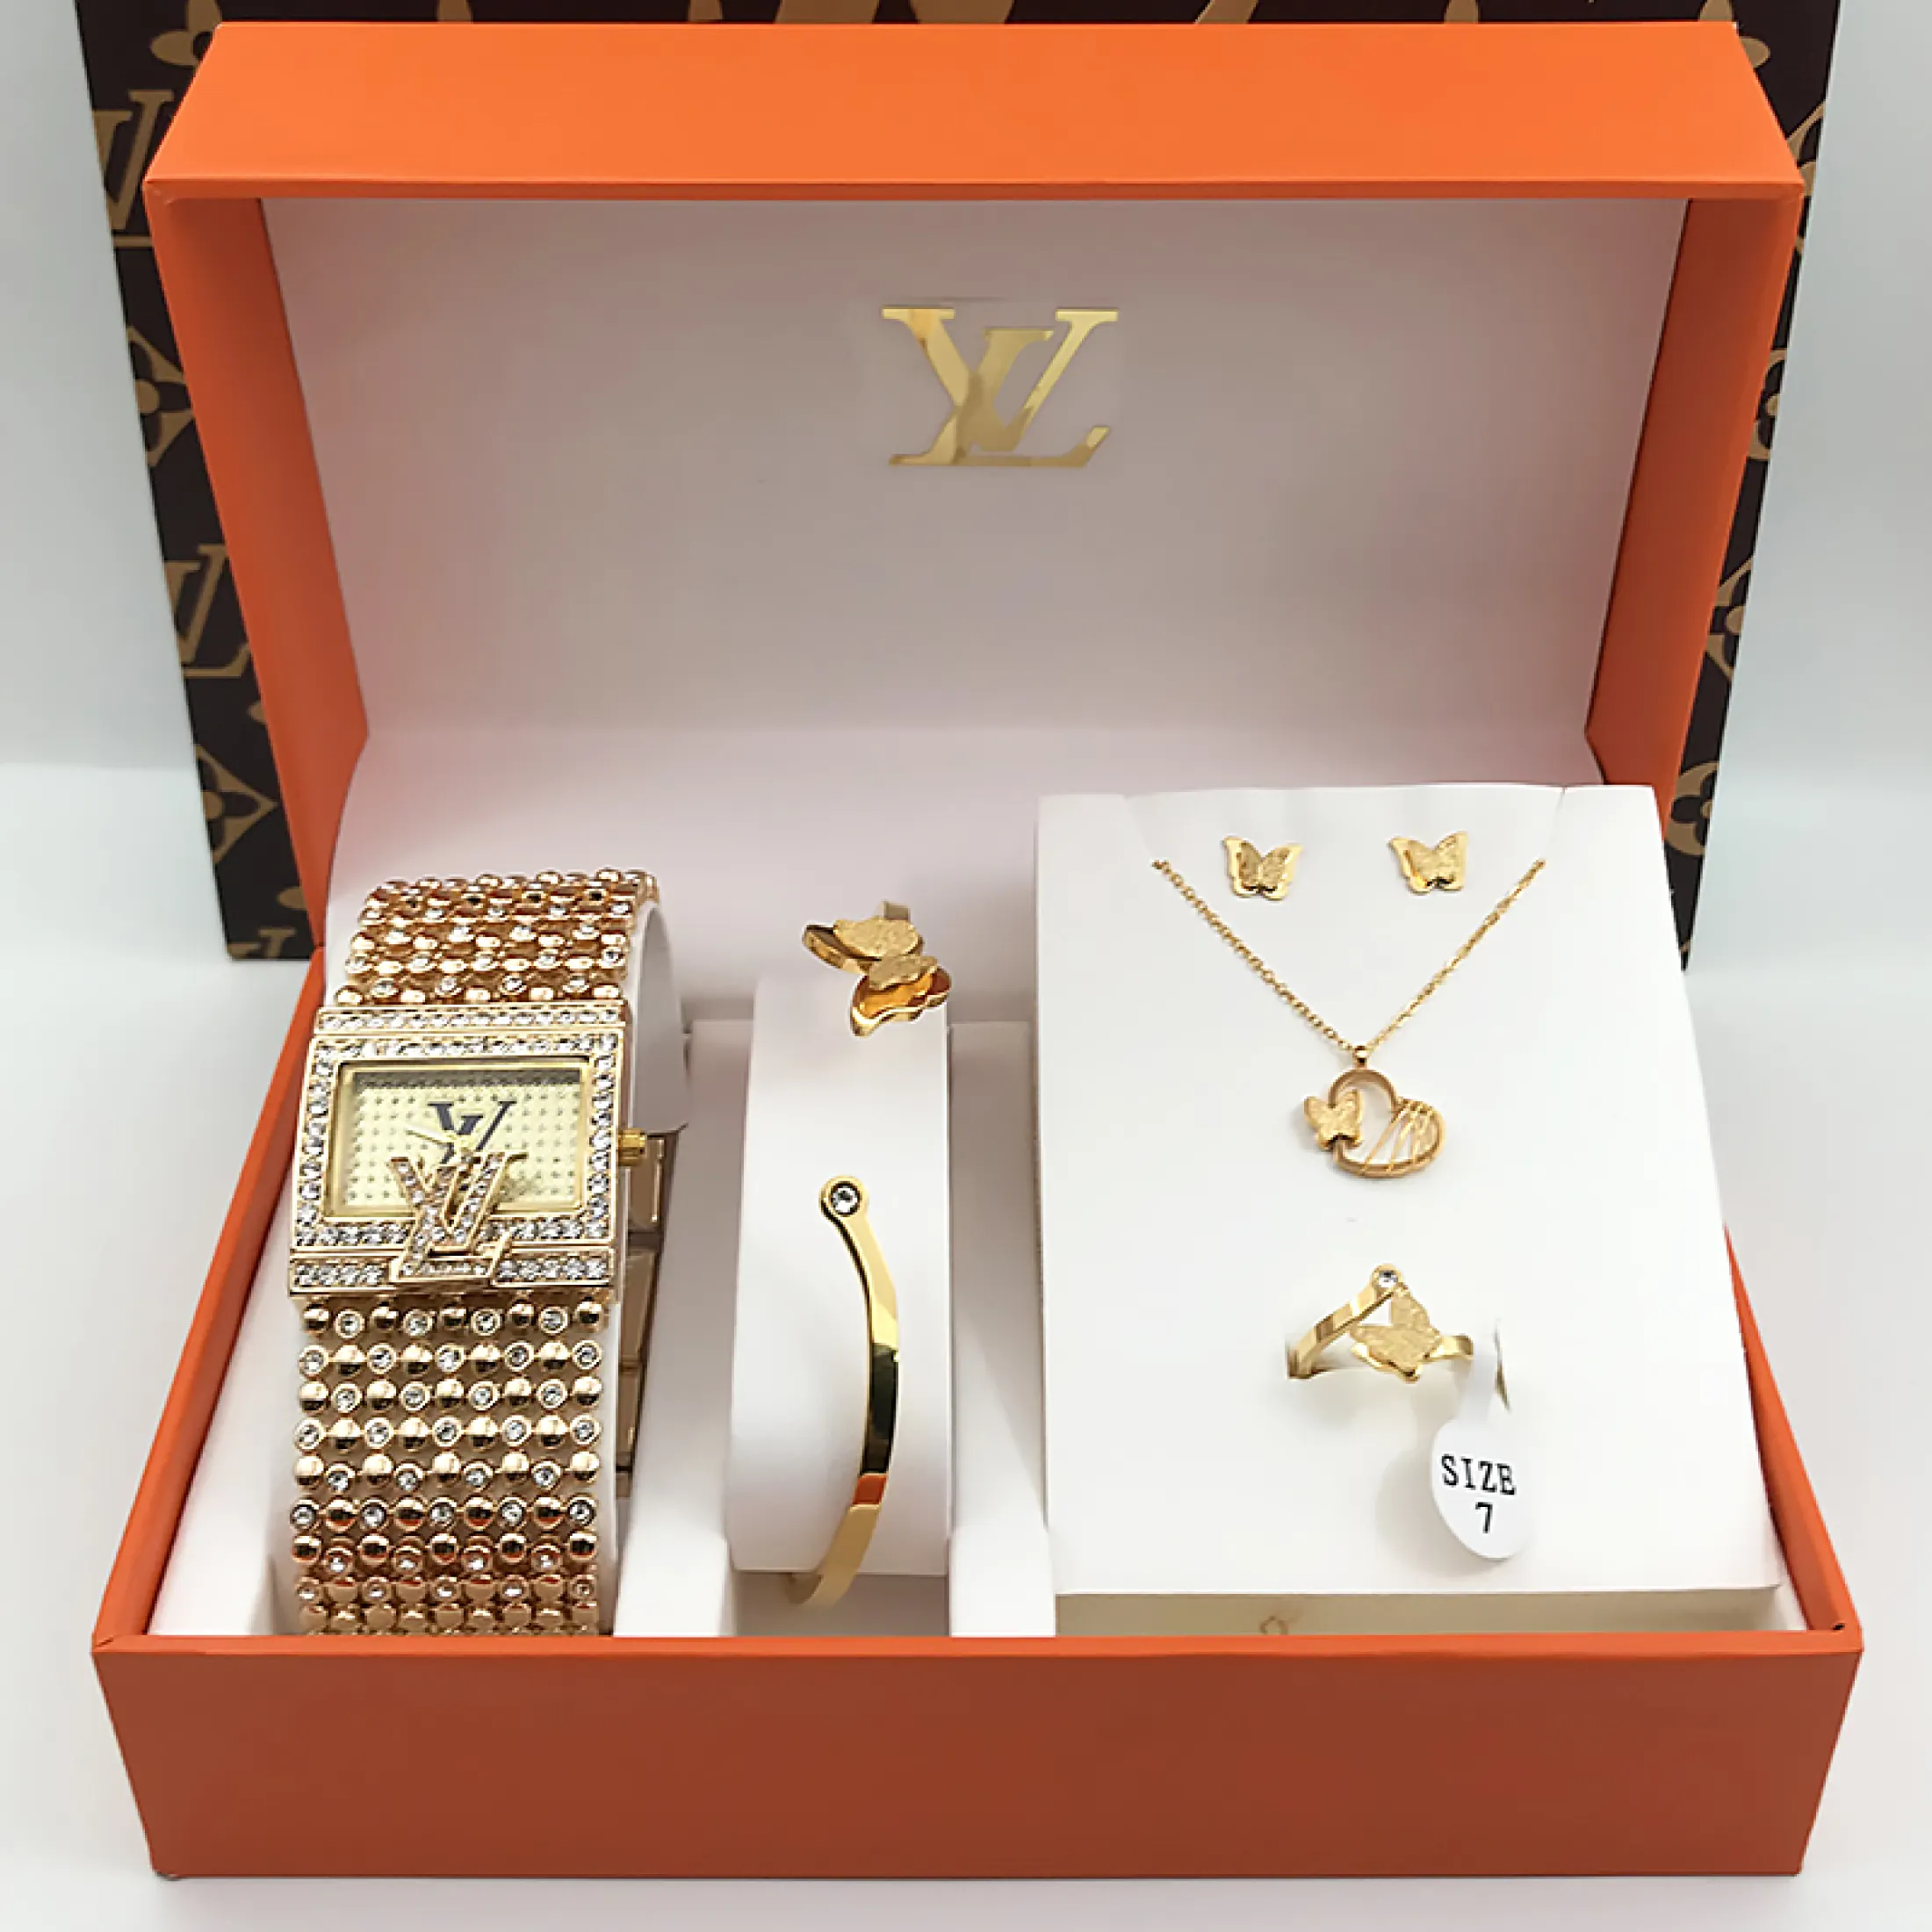 LV Louis Vuitton Jewelry Set for Women 5 in 1 with Watch Bracelet Ring Earrings Necklace LV Louis VuittonSet for Women LV Accessories Set GUCCIs Watch for Women Set LV Watch